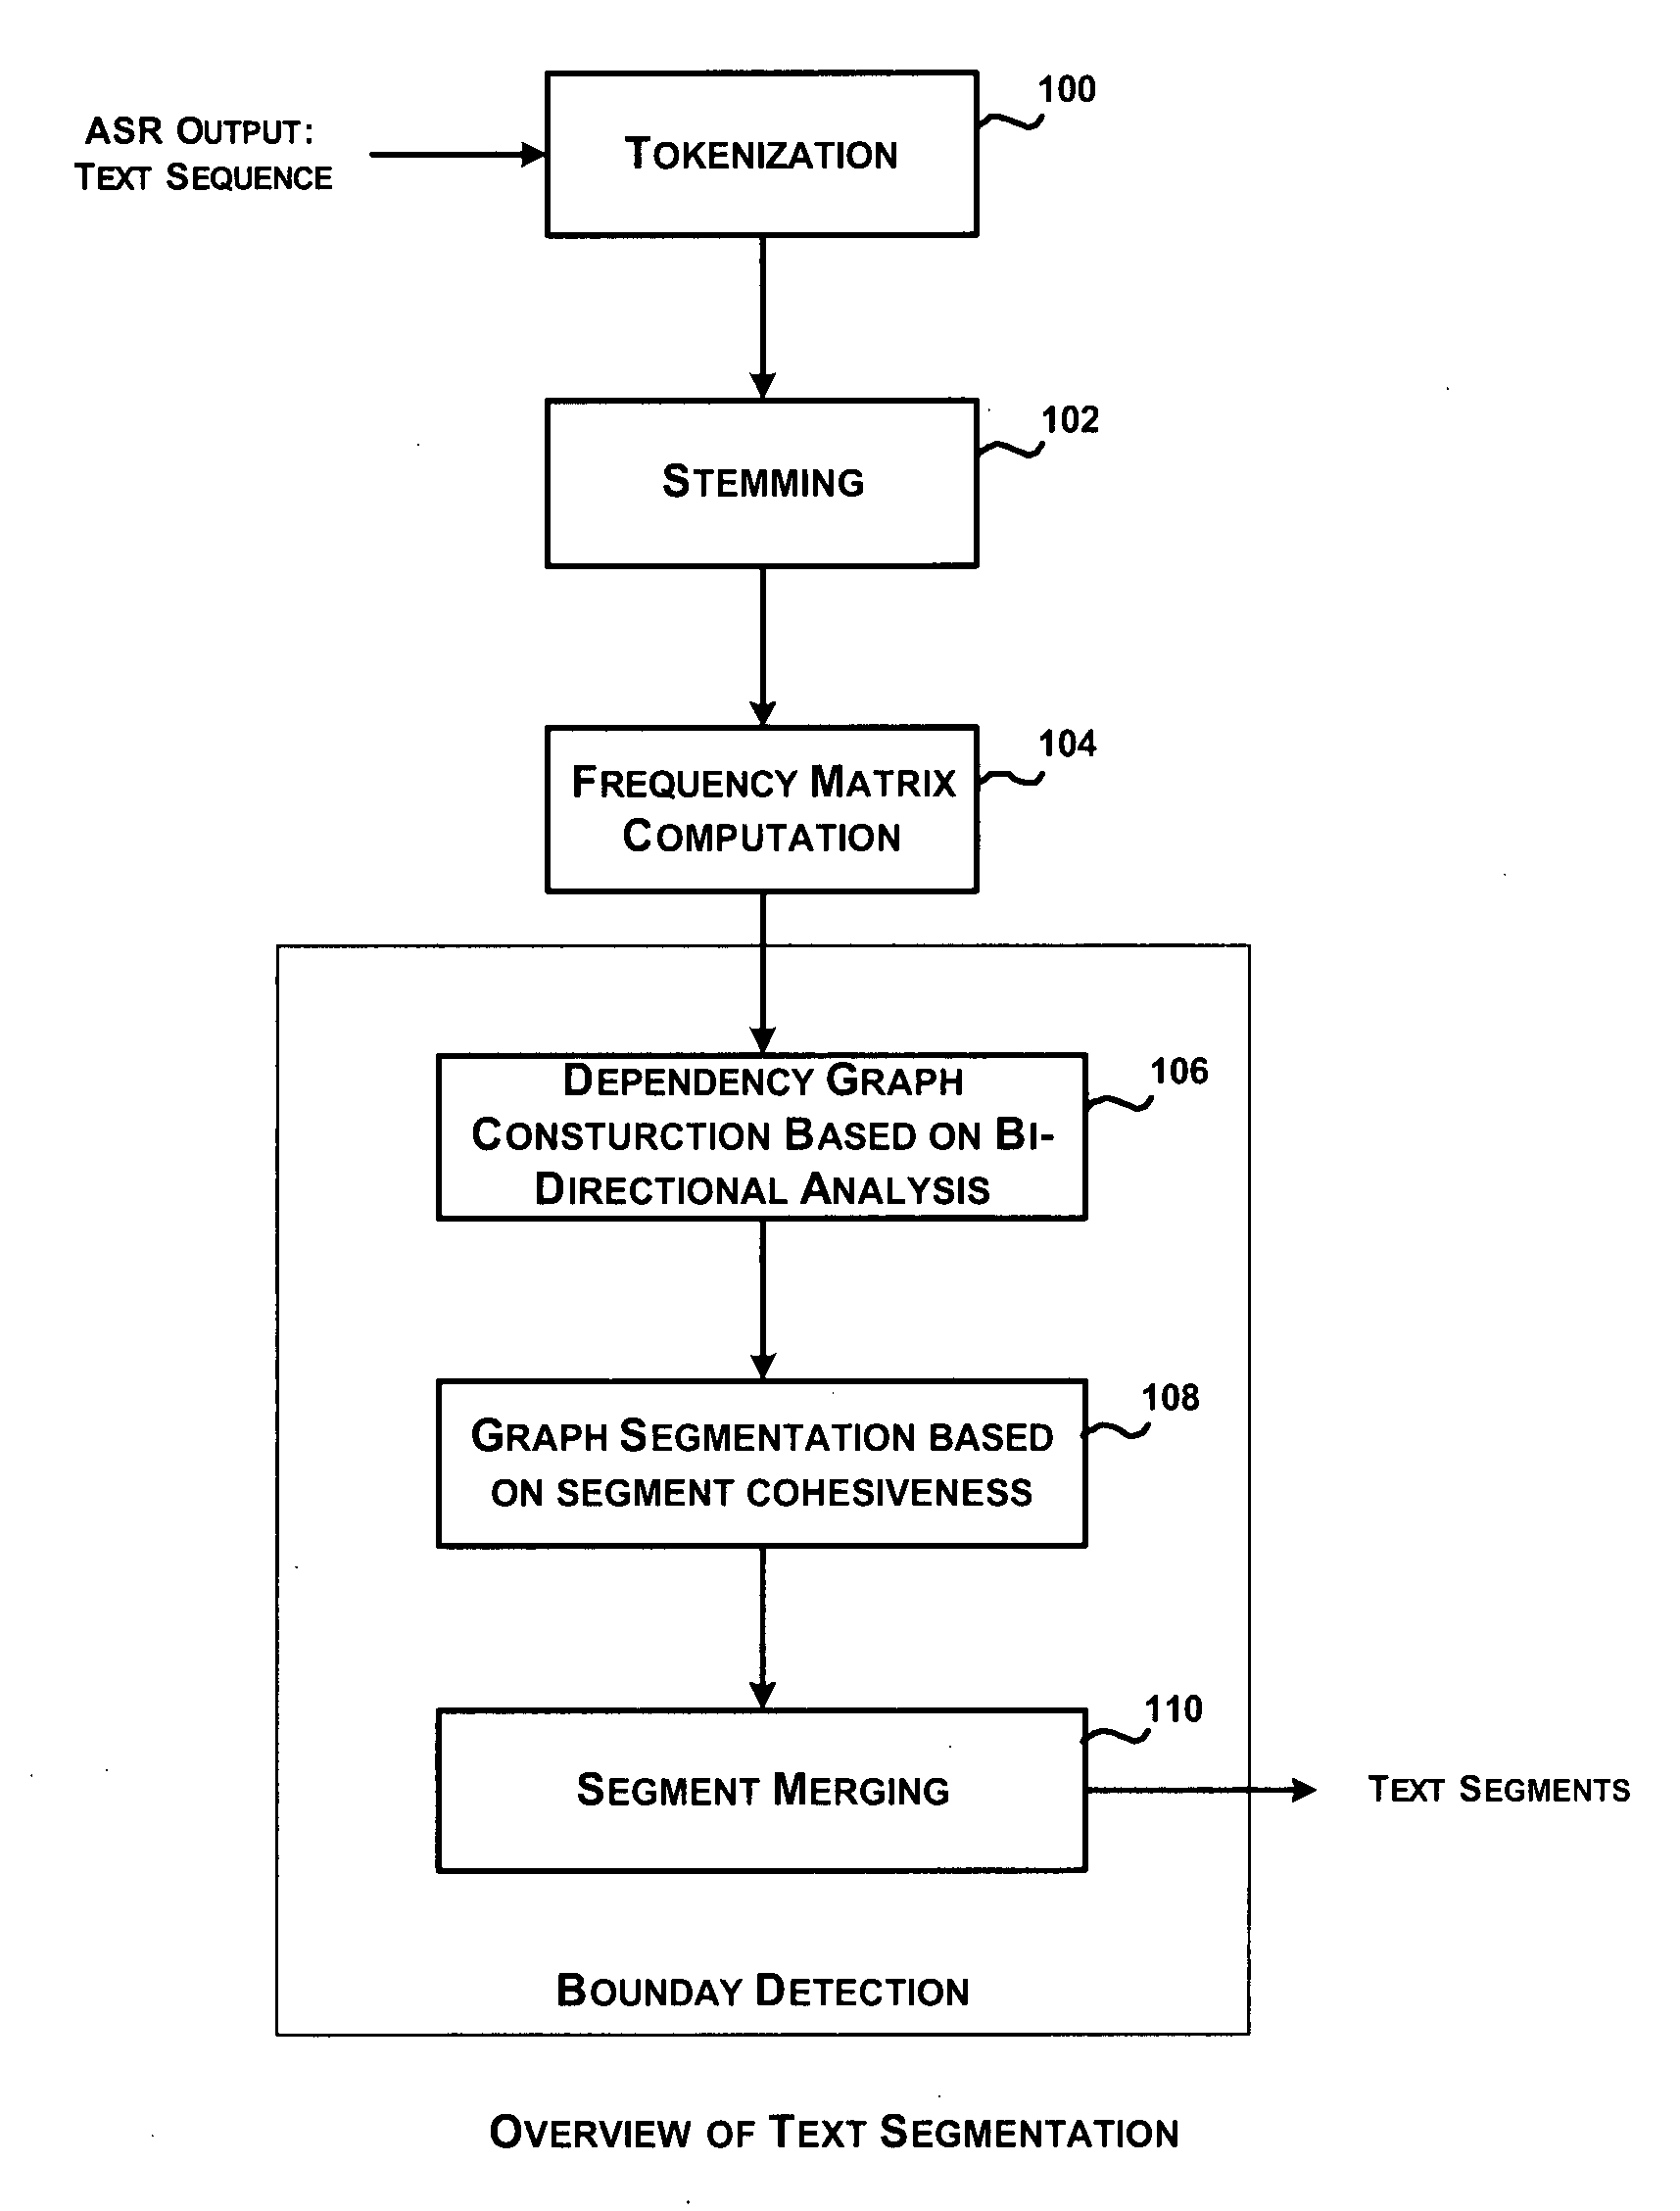 System and method for automatic segmentation of ASR transcripts